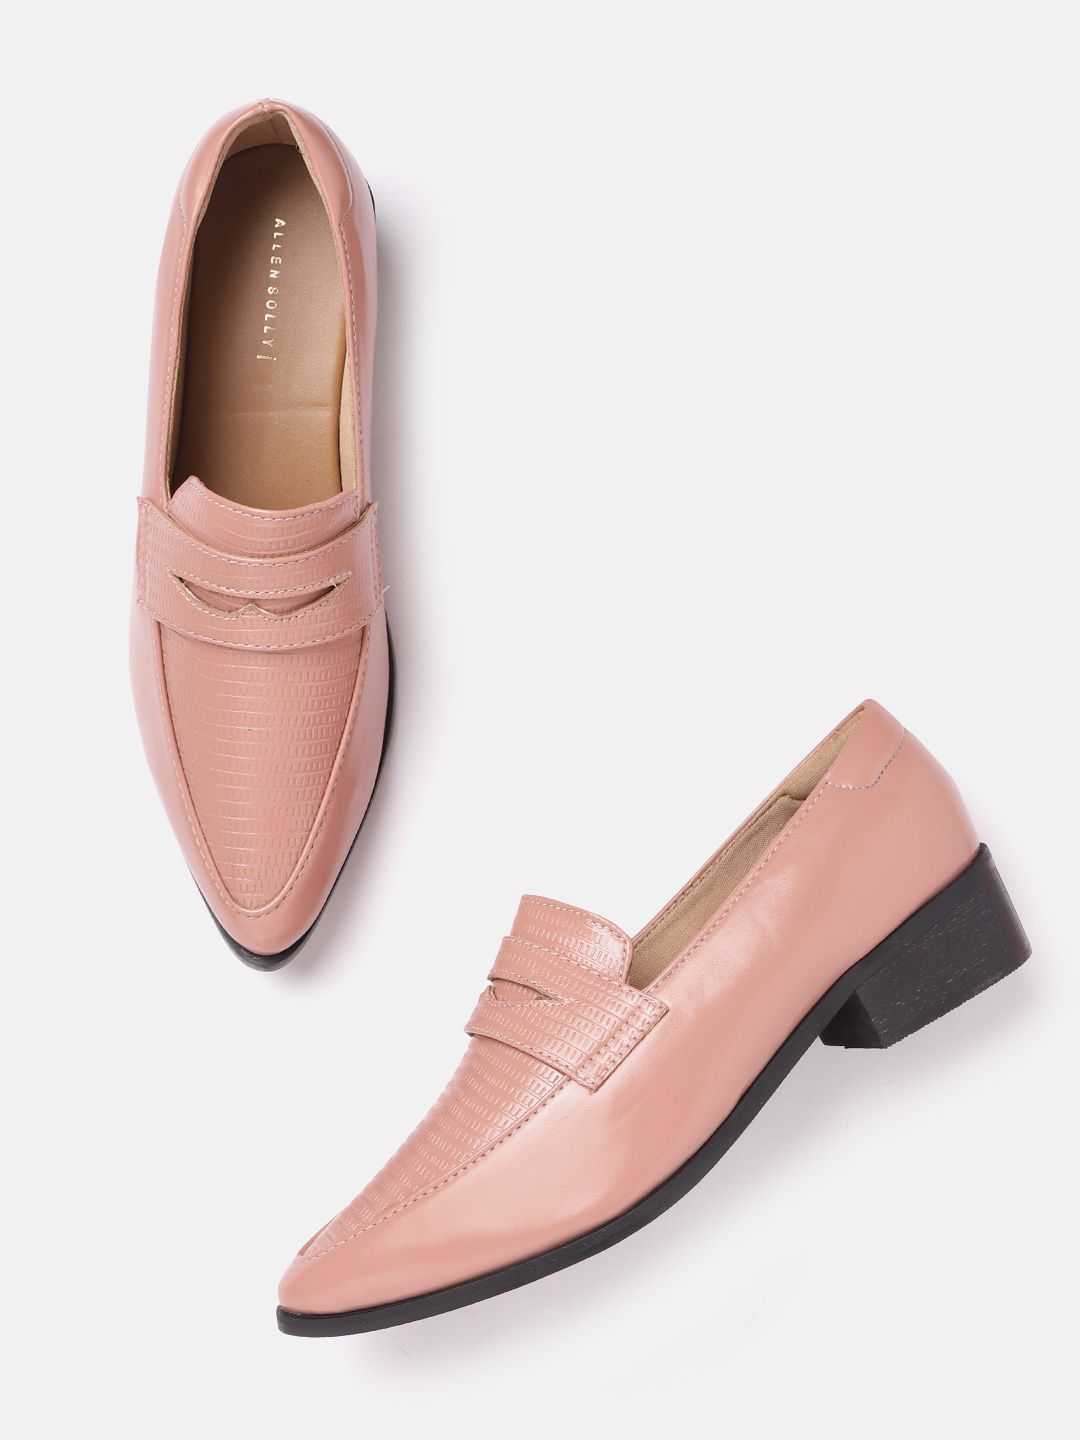 Allen Solly Women Peach-Coloured Snakeskin Textured Loafers Price in India